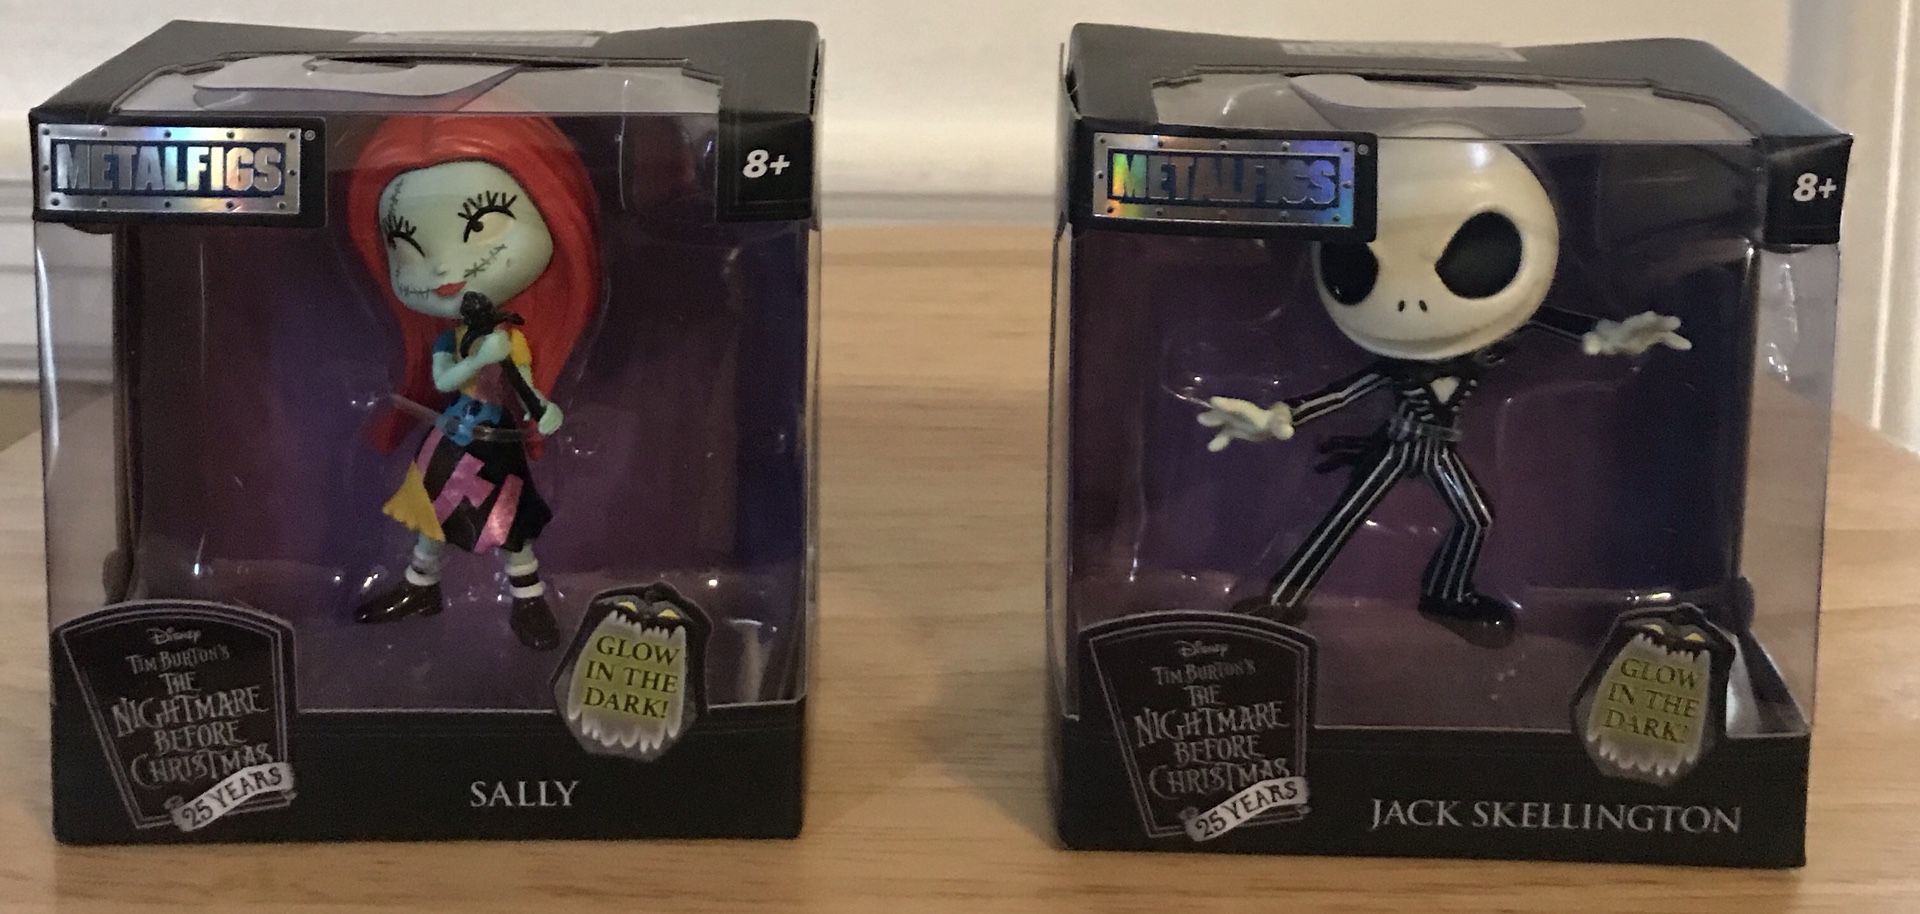 The Nightmare Before Christmas Figurines (new in box)